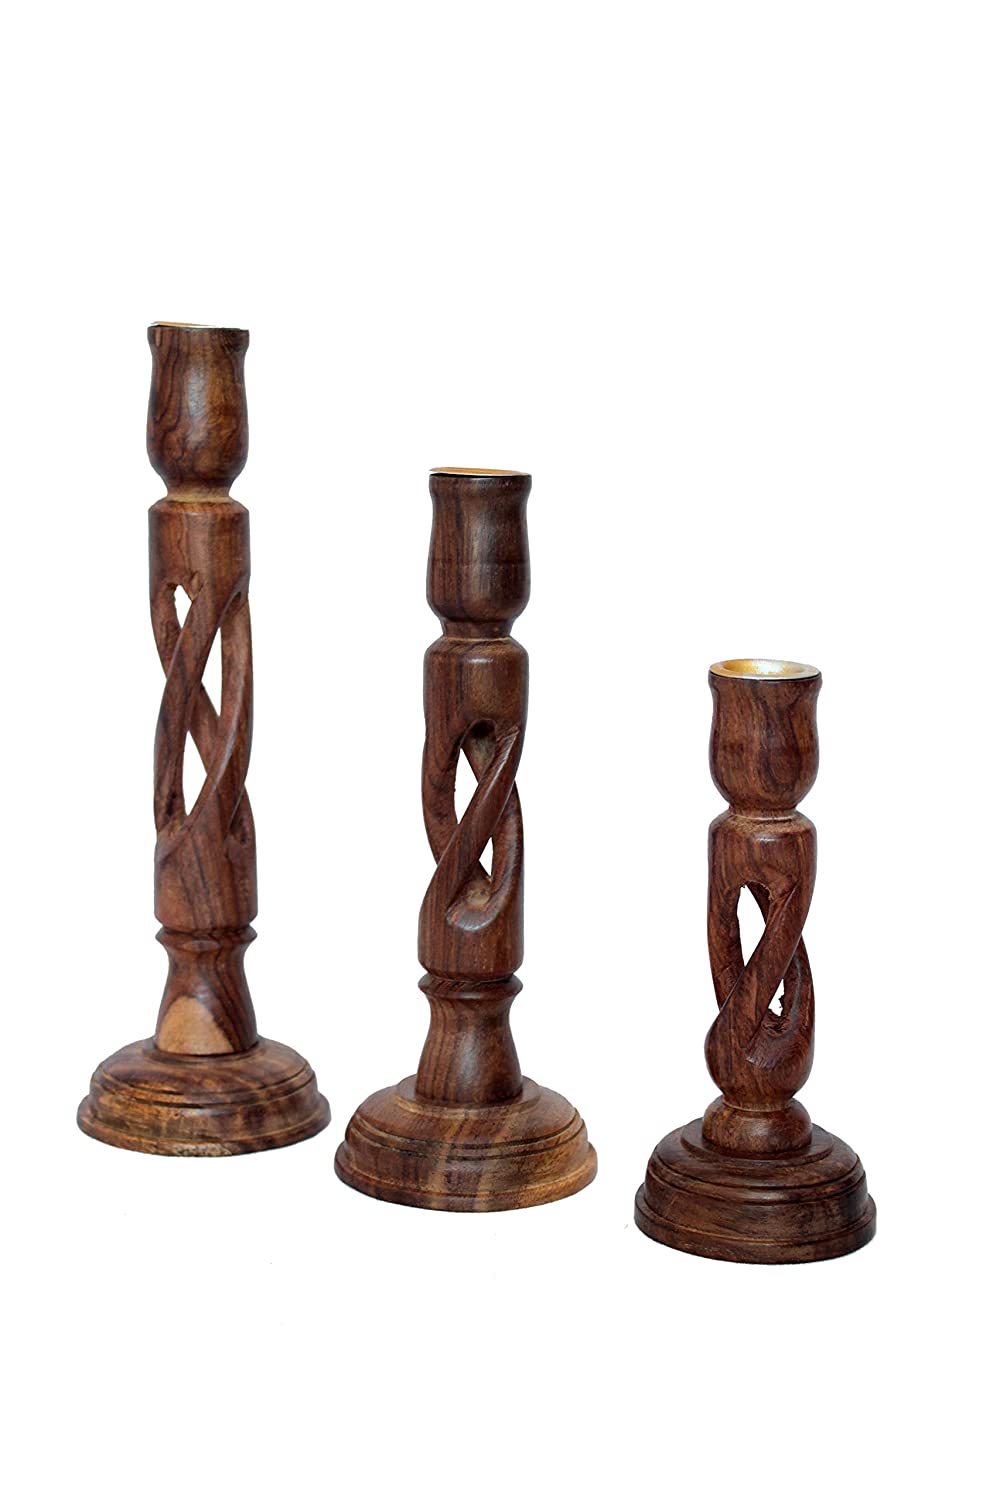 Wooden Pillar Candle Stand Candle Holders for Living Room, Table Centerpiece, Tealight Holder Candle Stand for Home Decoration Dime Store